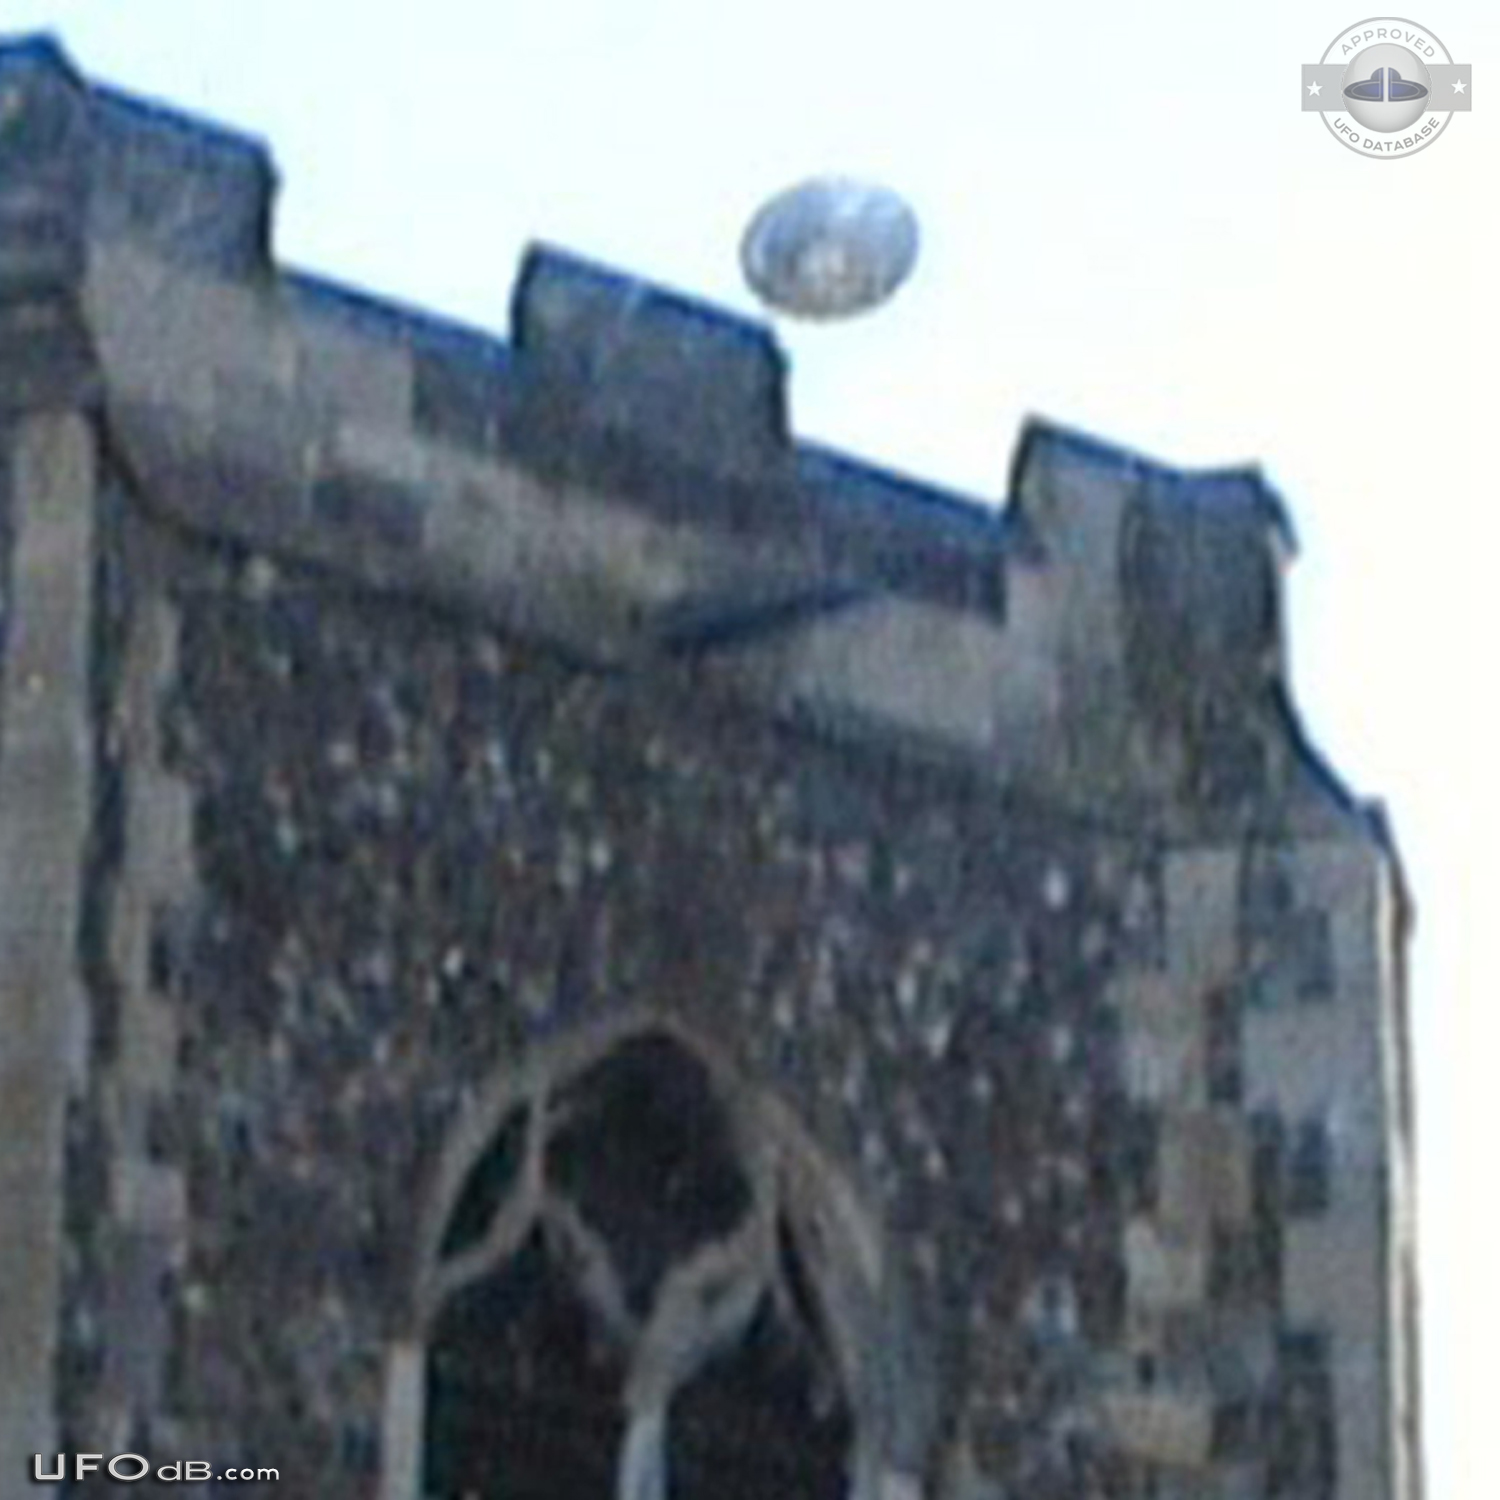 Saucer UFO seen right over Church in Norwich, Norfolk UK 2005 UFO Picture #587-3